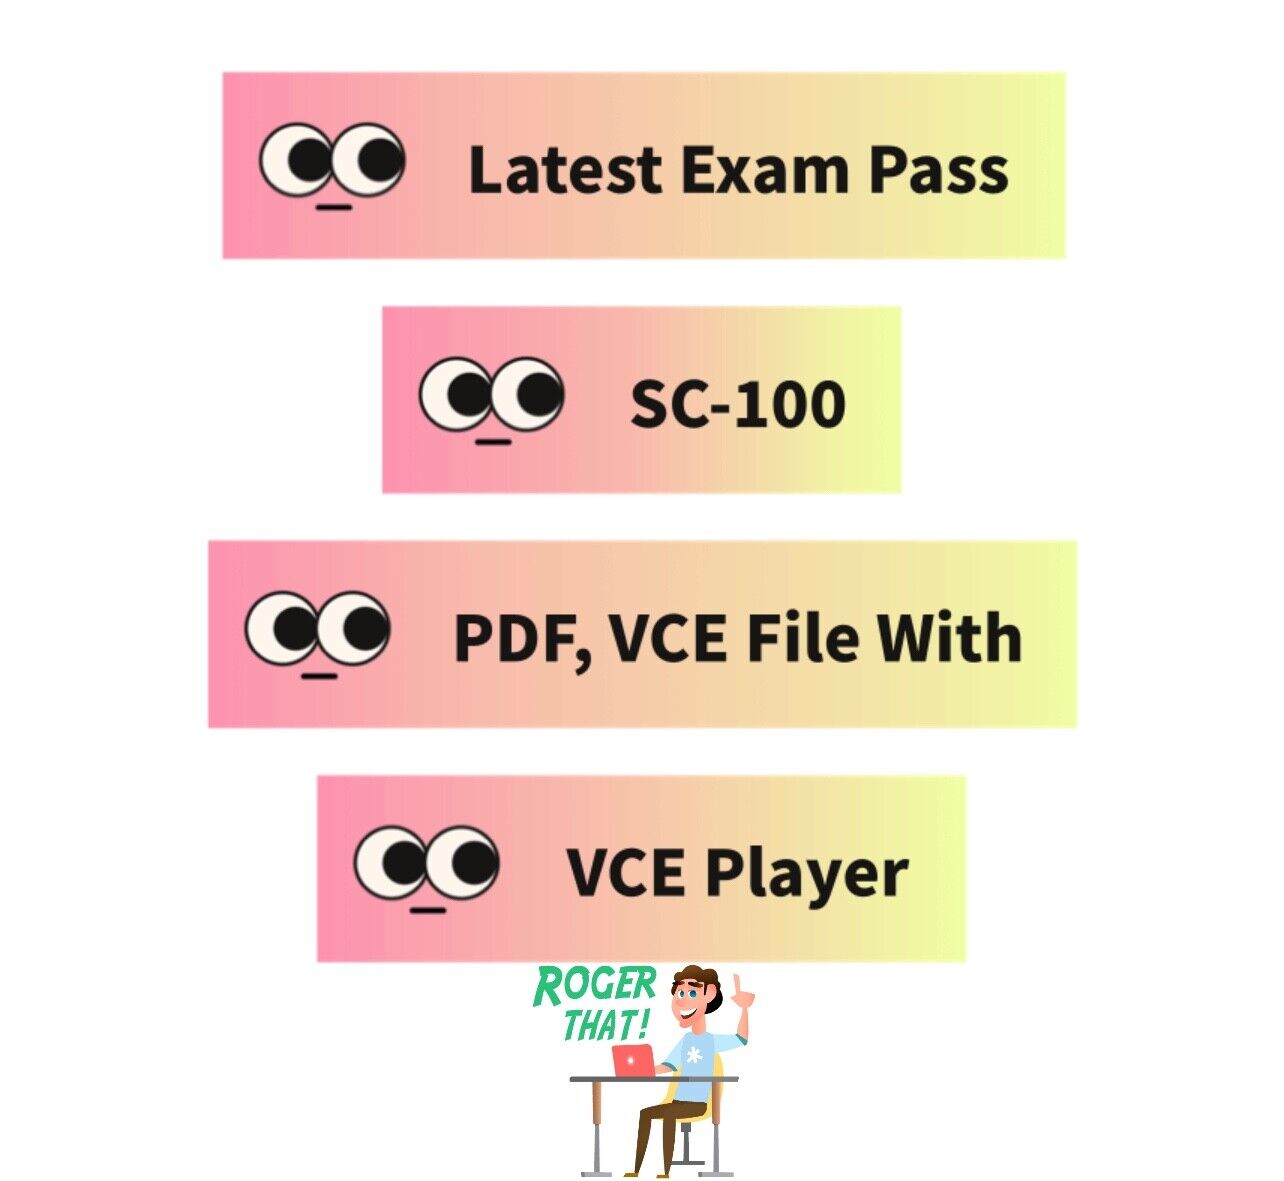 SC-100 Exam dumps in PDF,VCE - JANUARY updated120 Questions Free updates